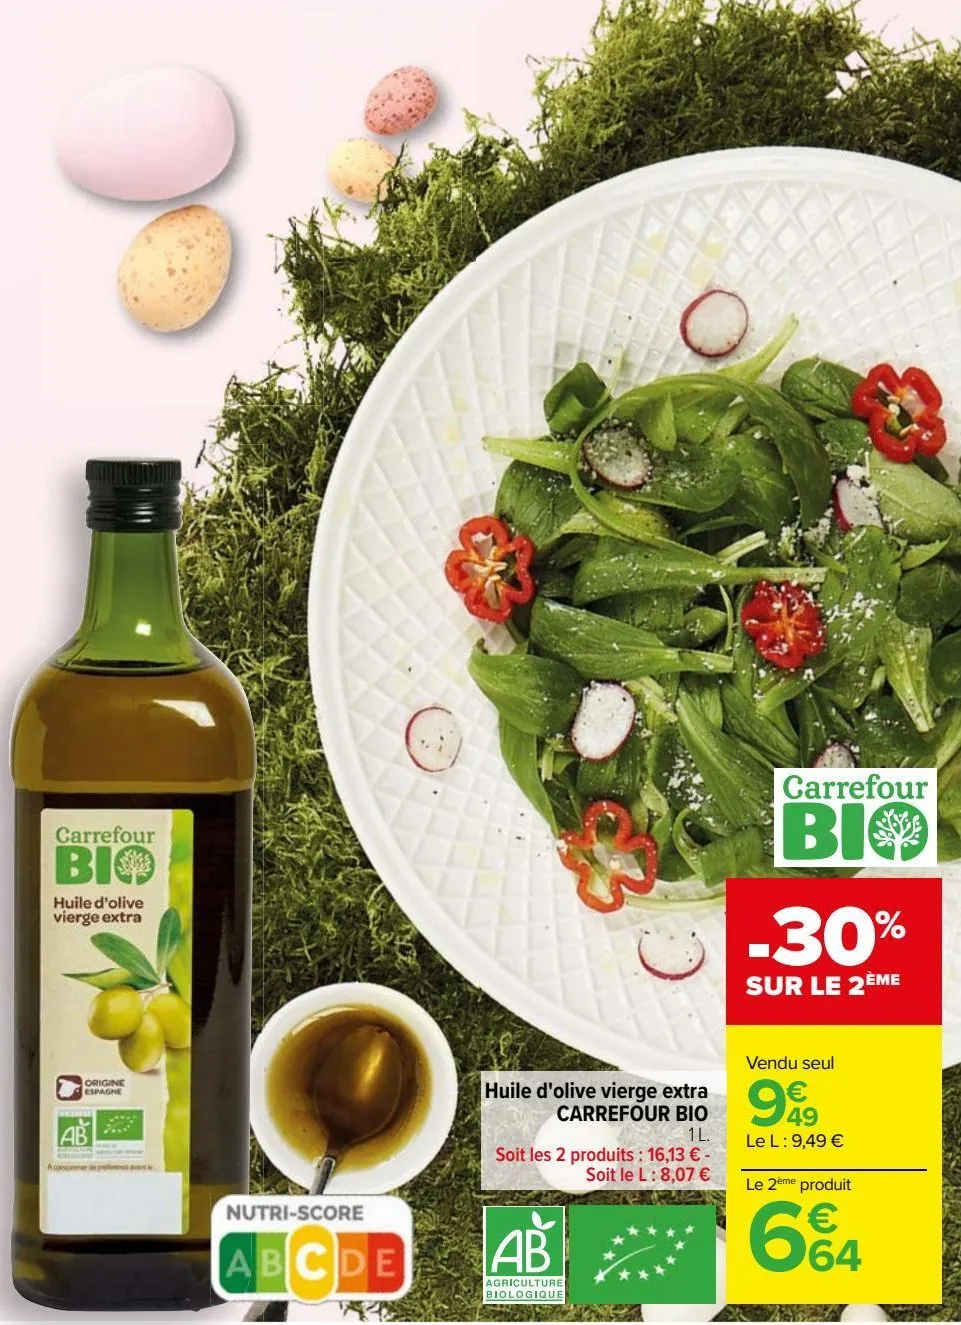 huile d'olive extra vierge carrefour bio